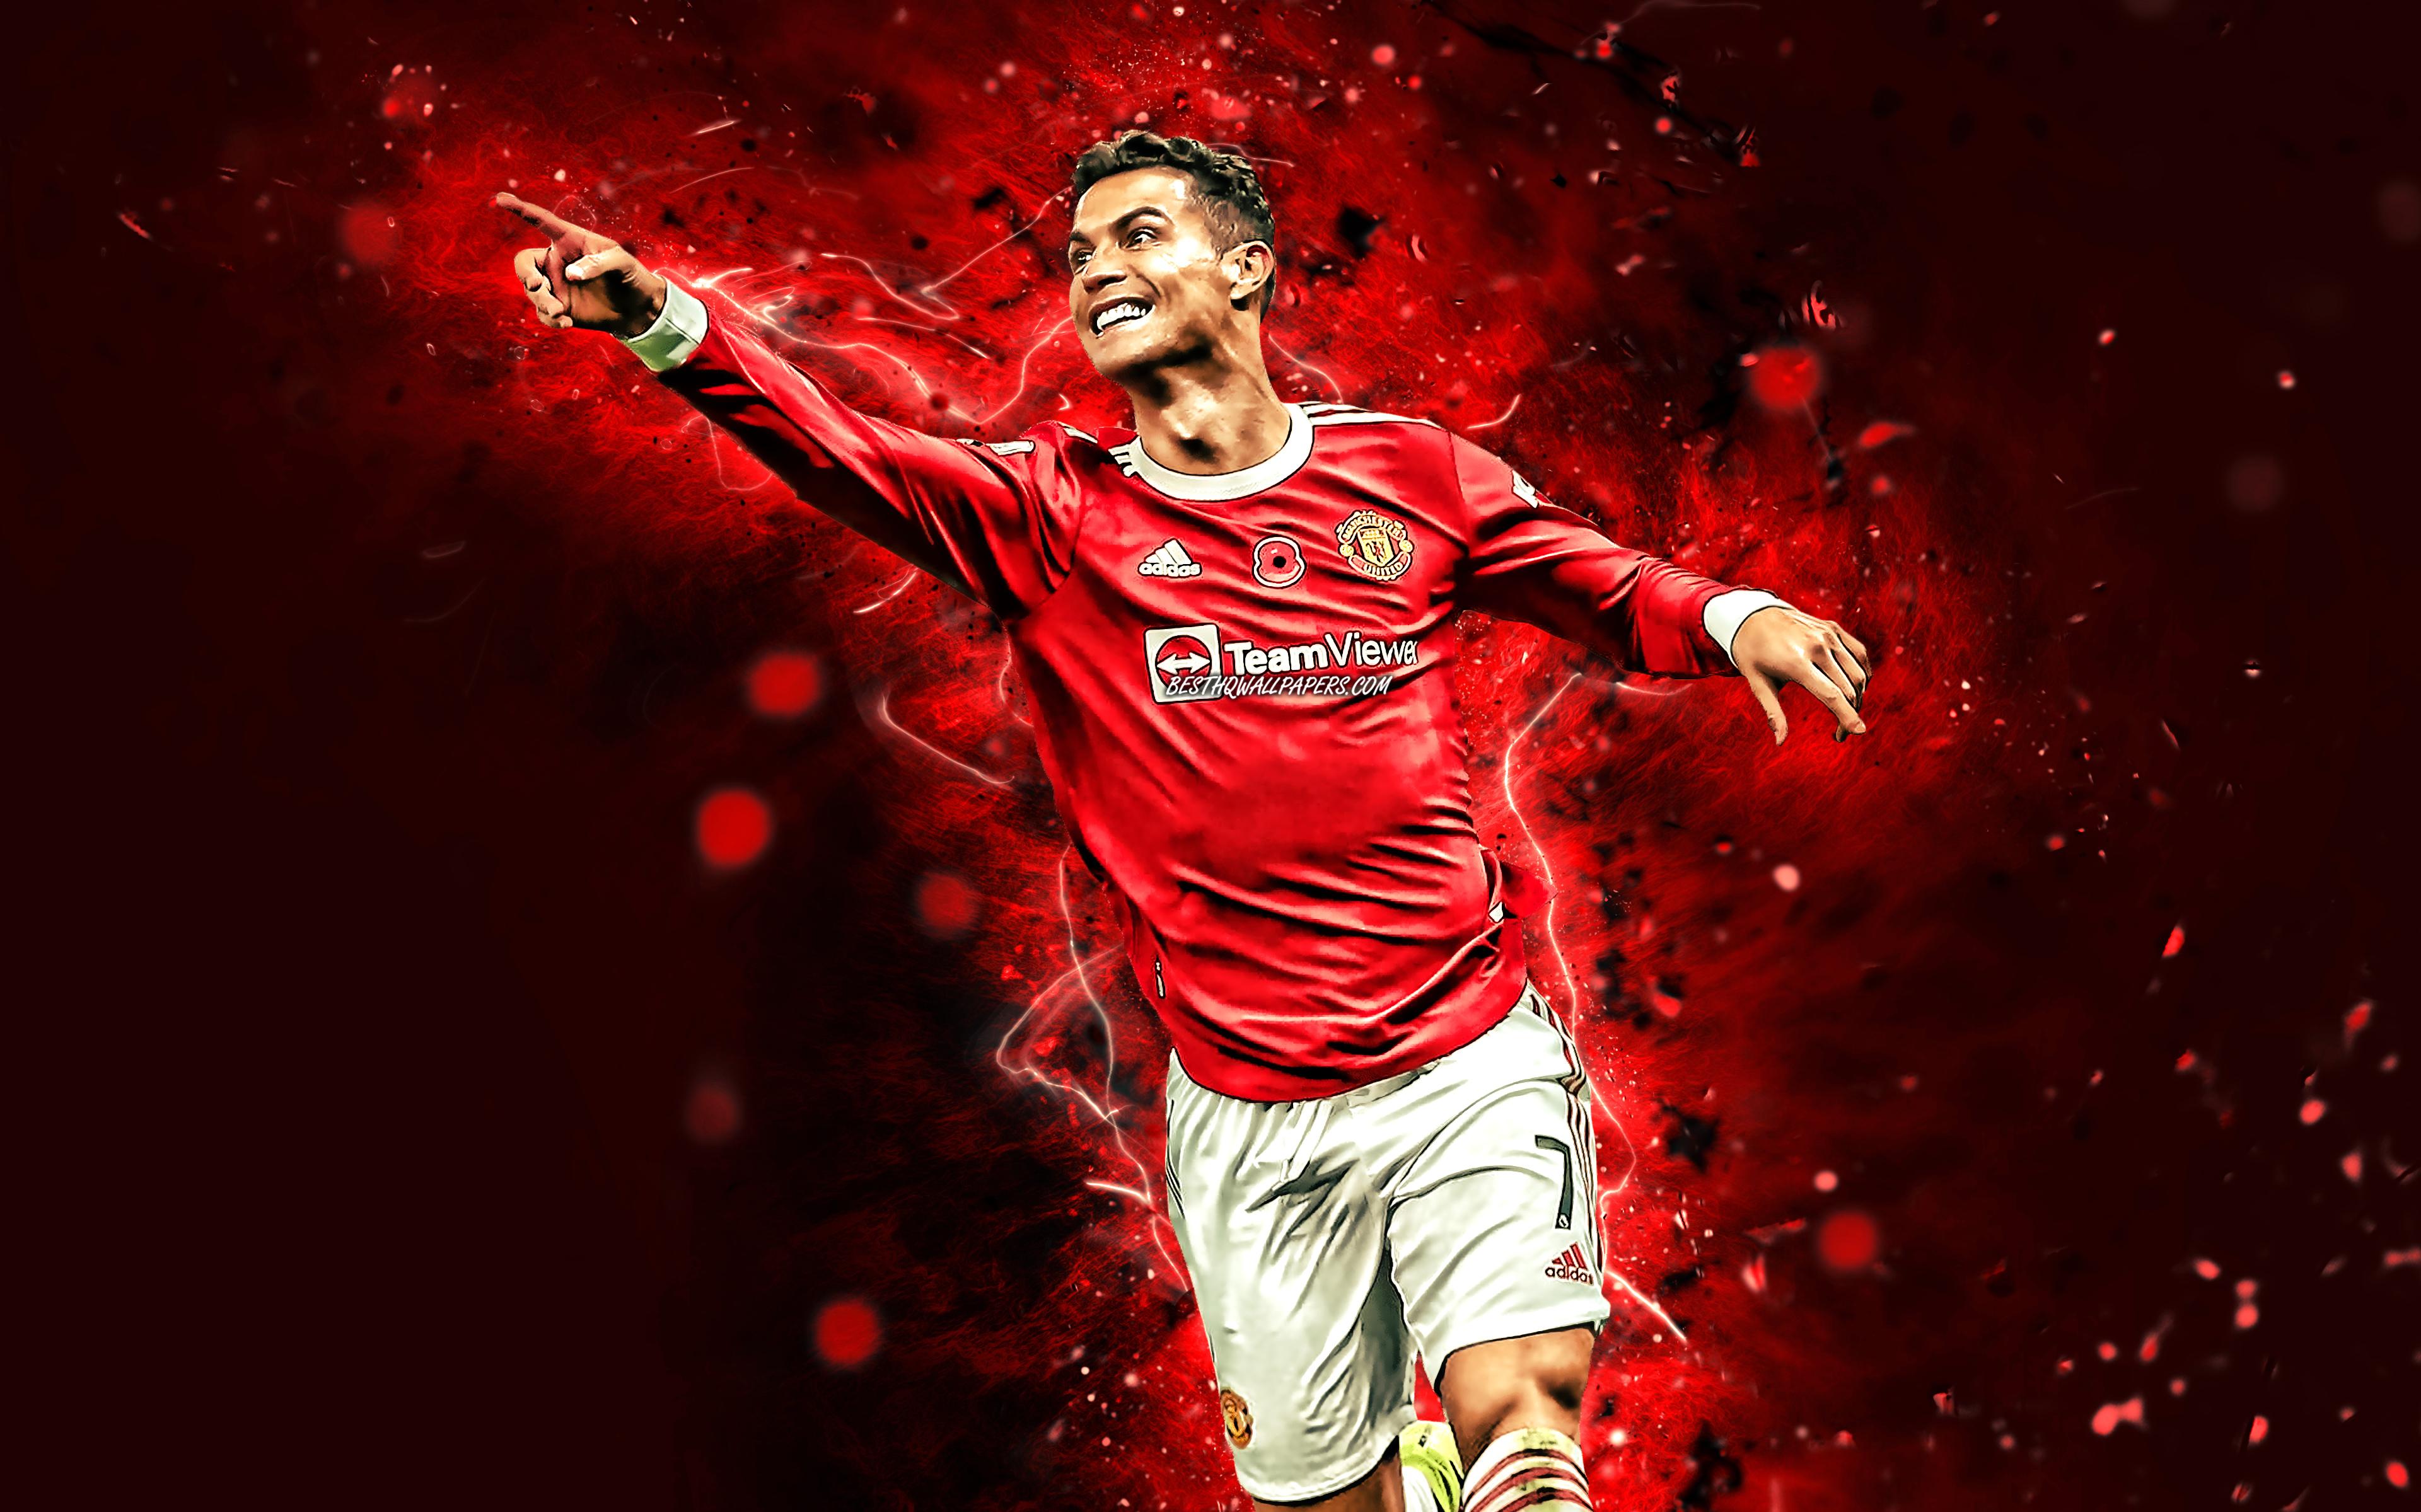 Free download Download wallpapers 4k Cristiano Ronaldo Manchester